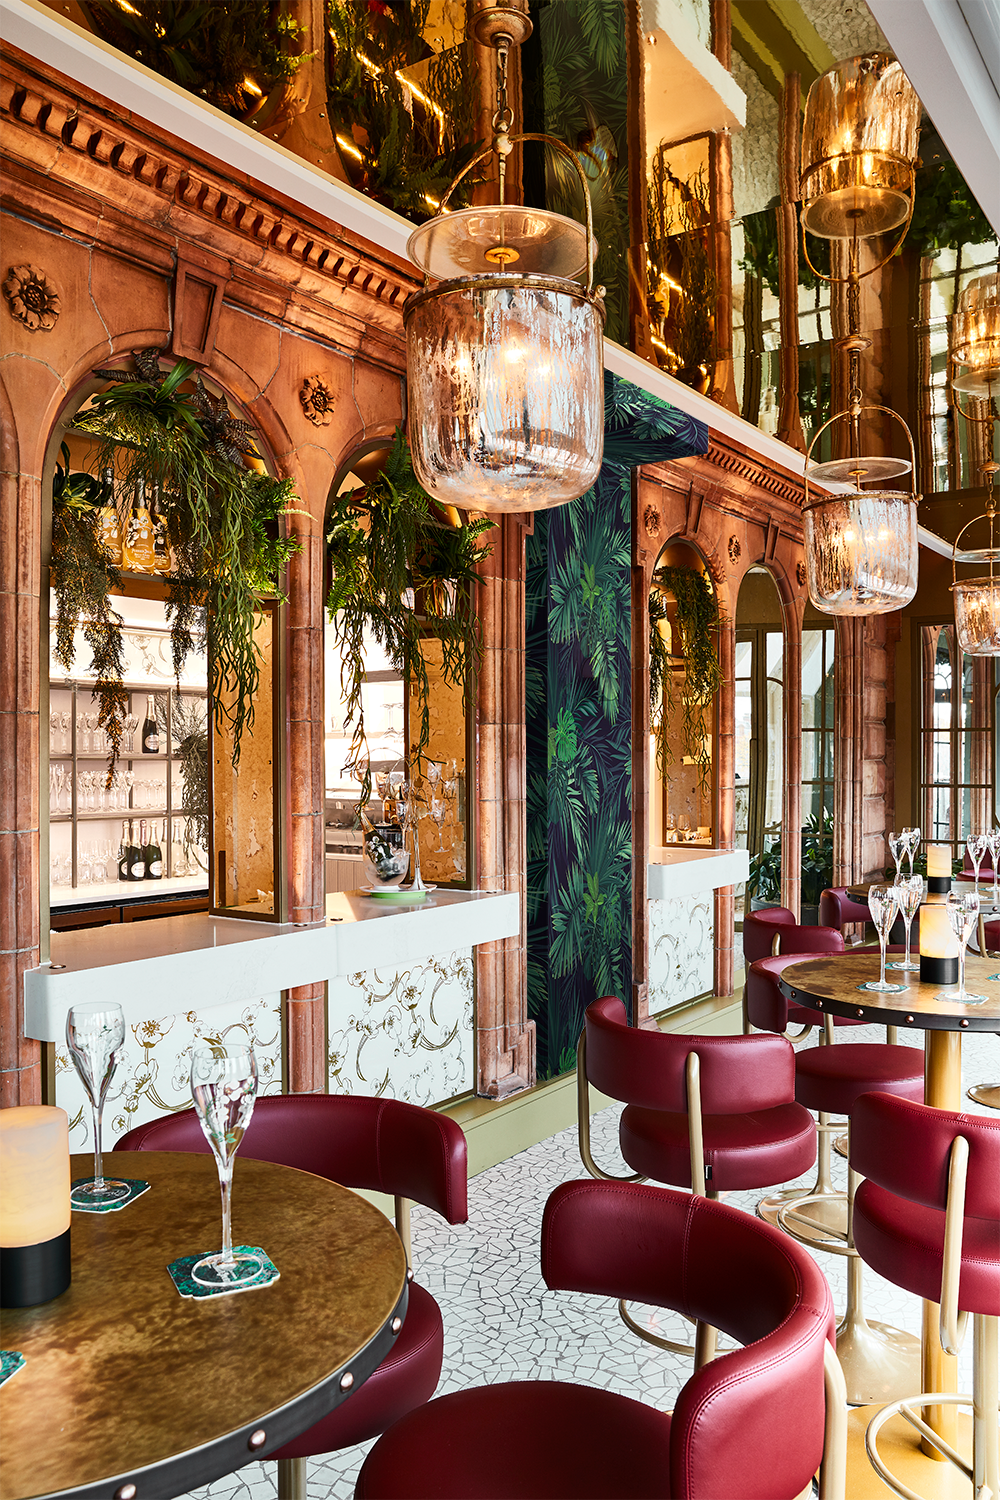 Harrods Perrier-Jouet Bar with red seats and background foliage